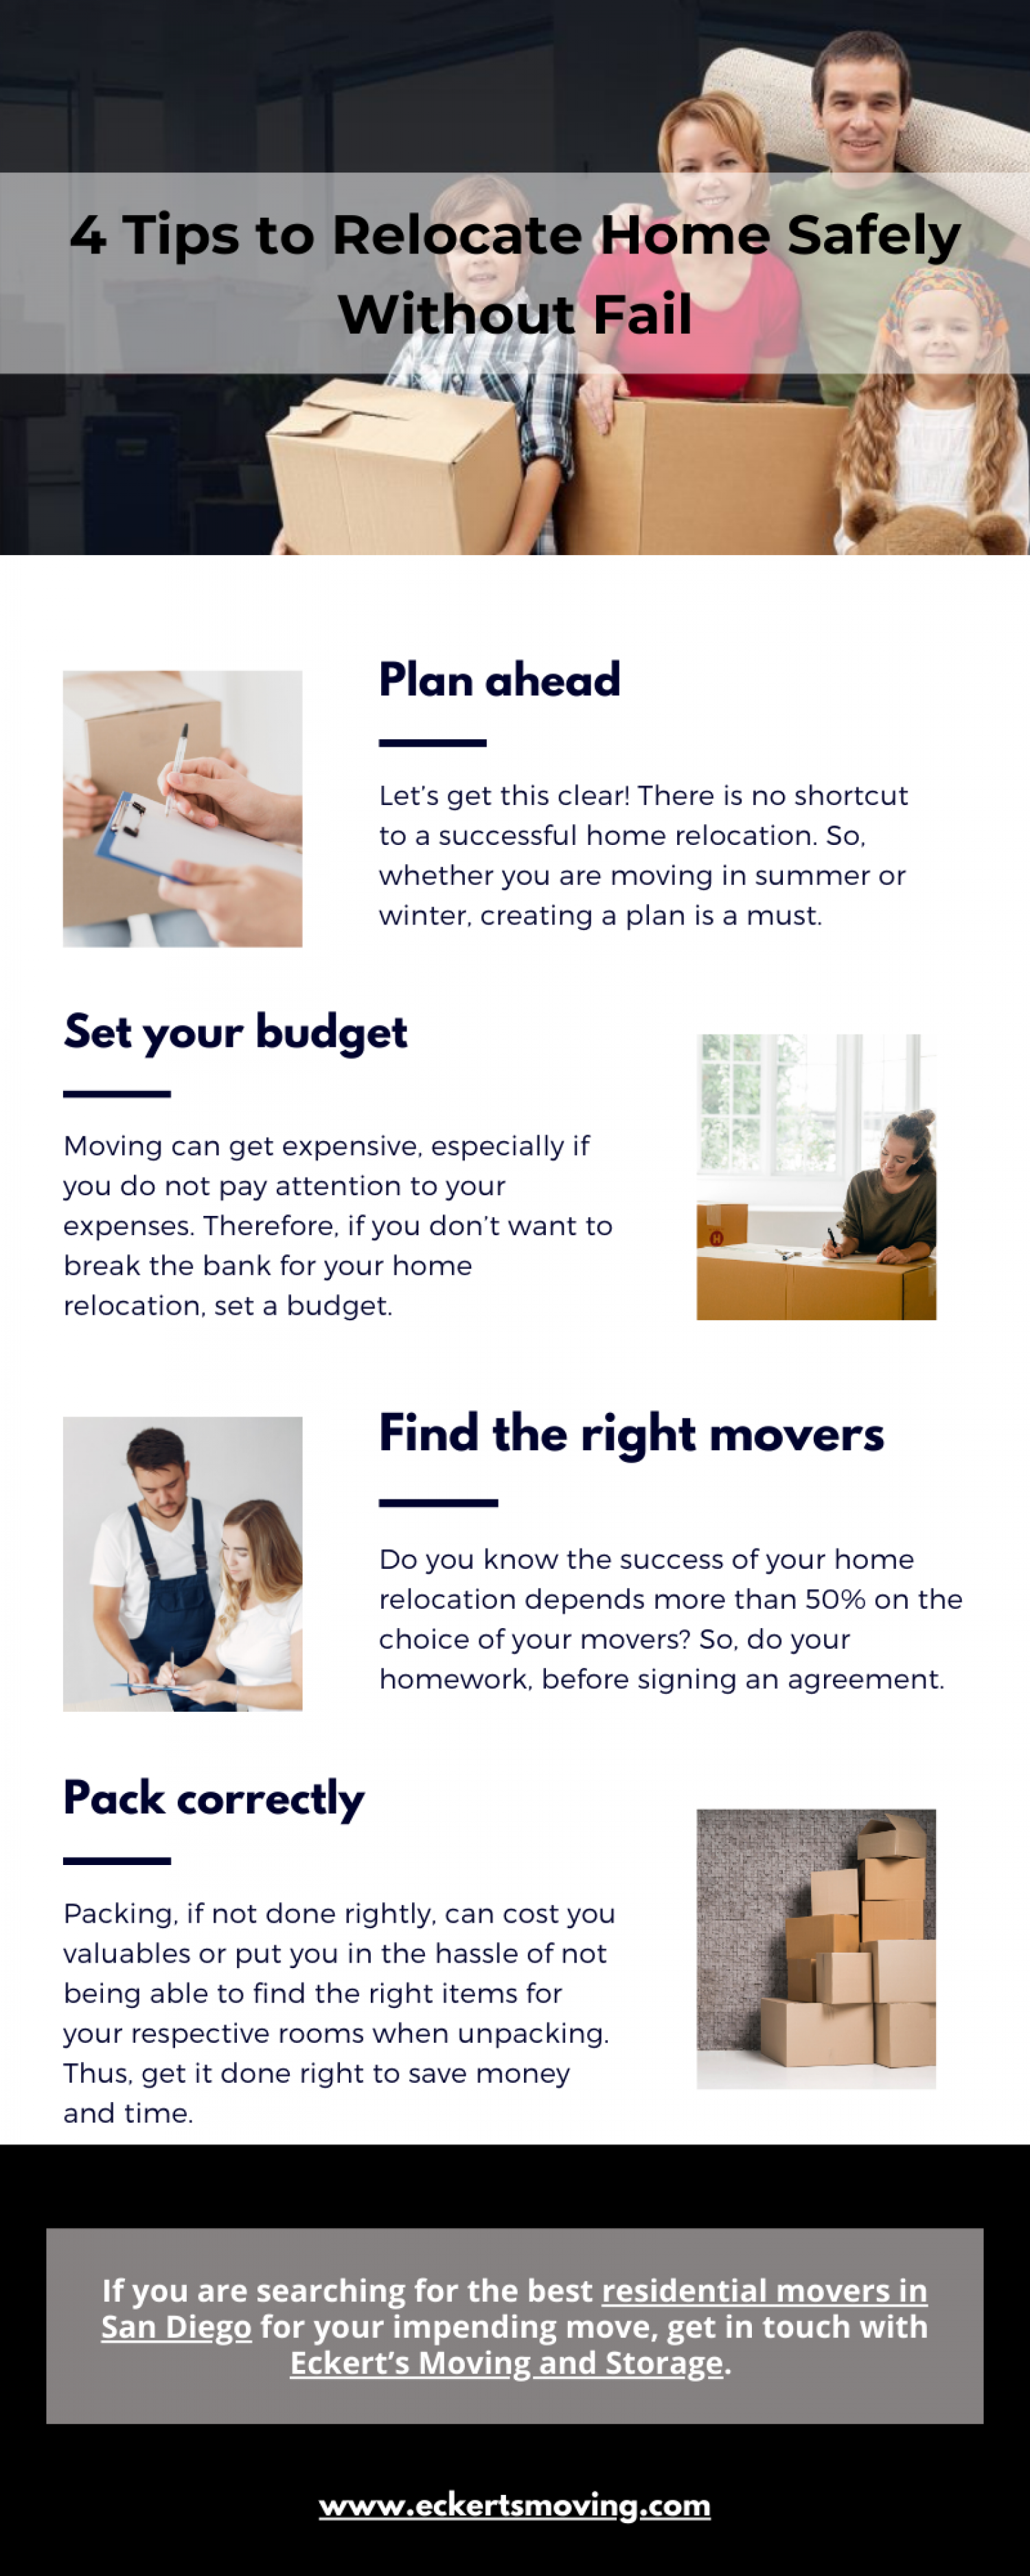 4 Tips to Relocate Home Safely Without Fail Infographic